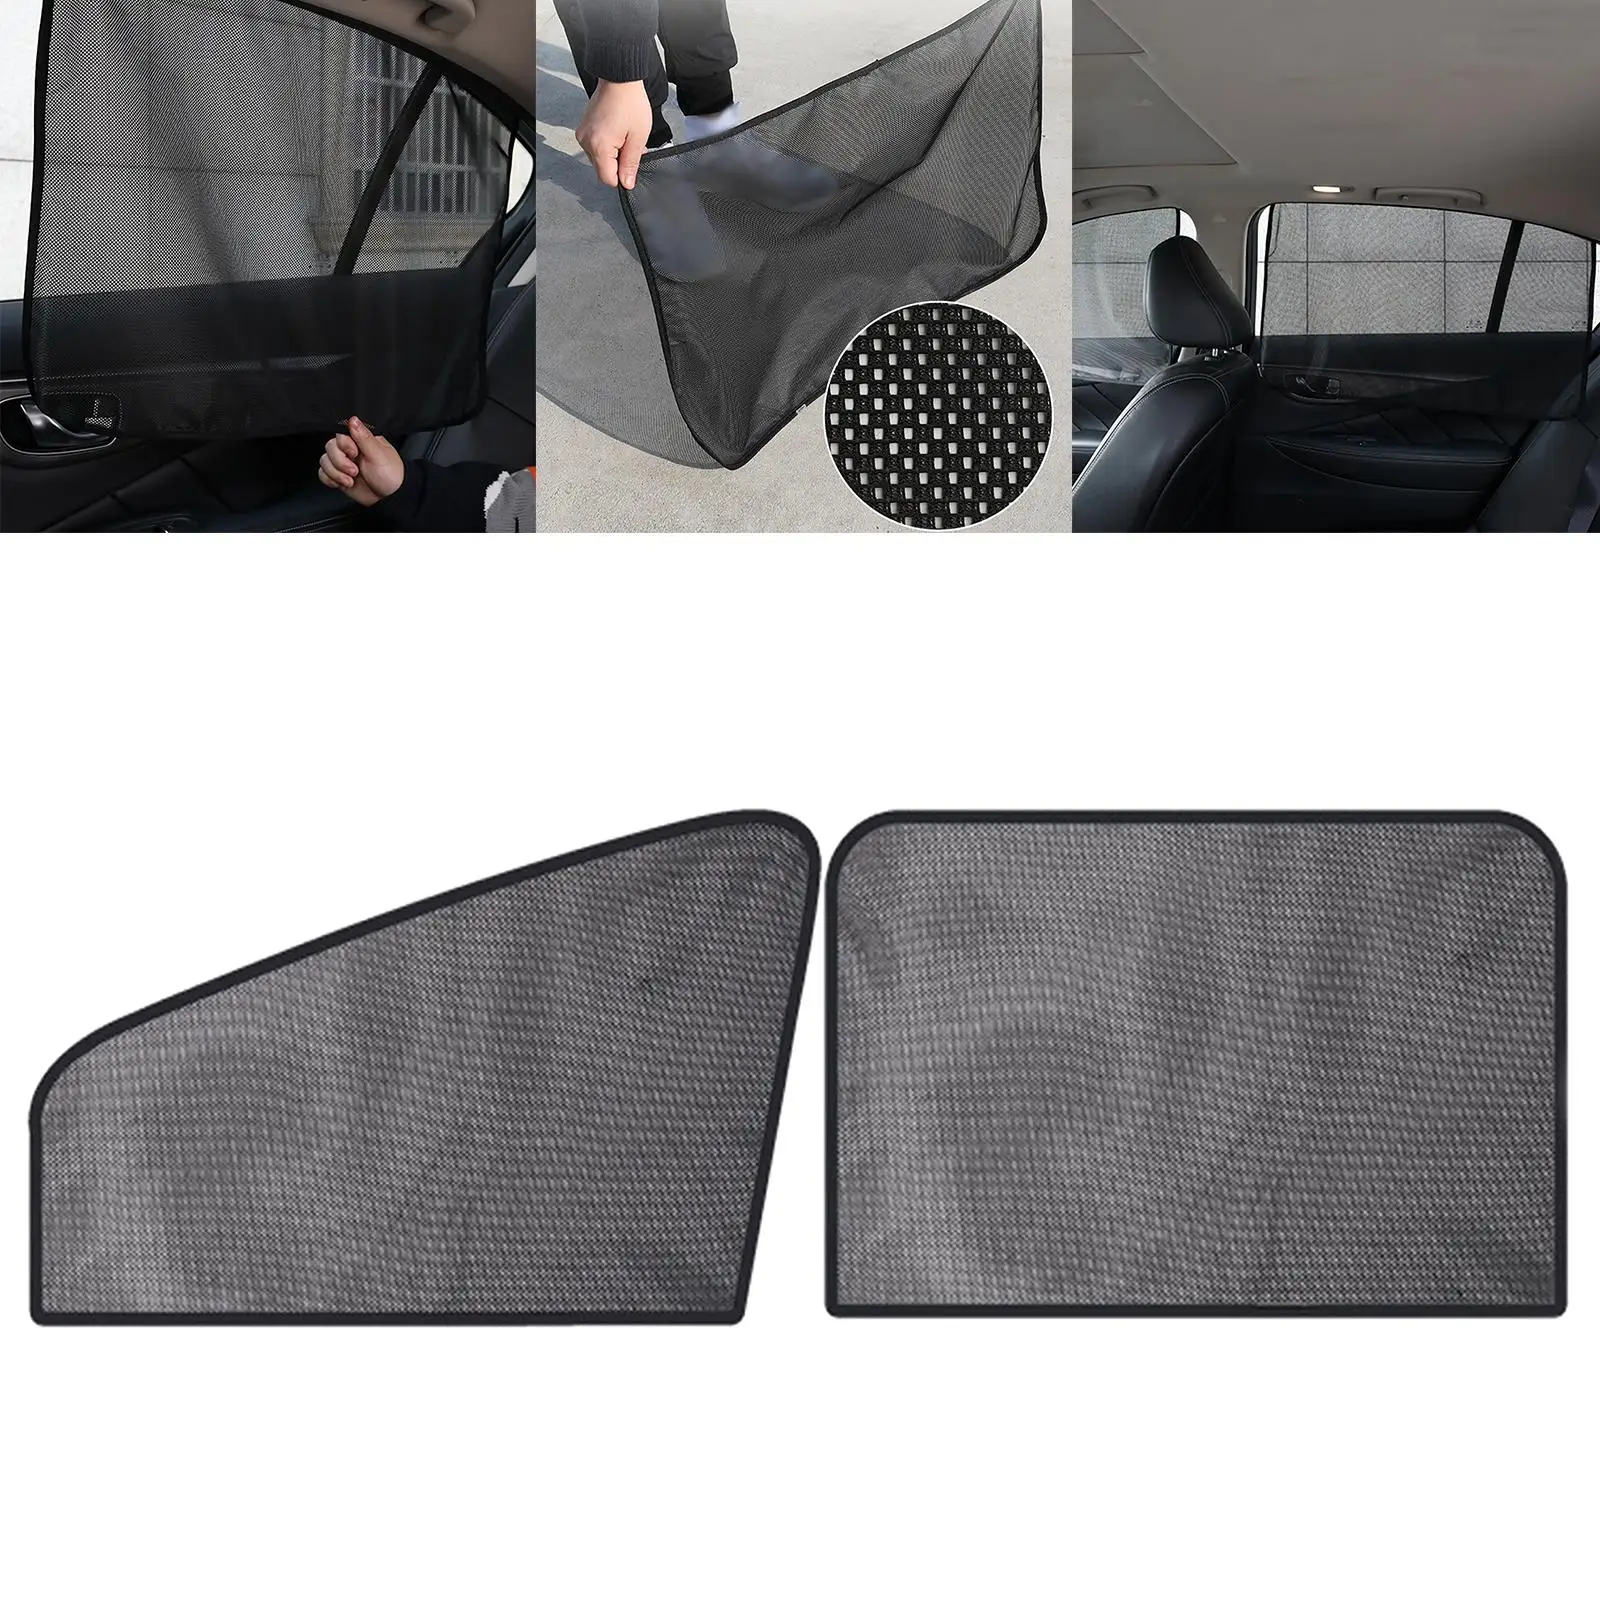 Car Side Window Sun Shade for Baby and Curtain Fits for SUV